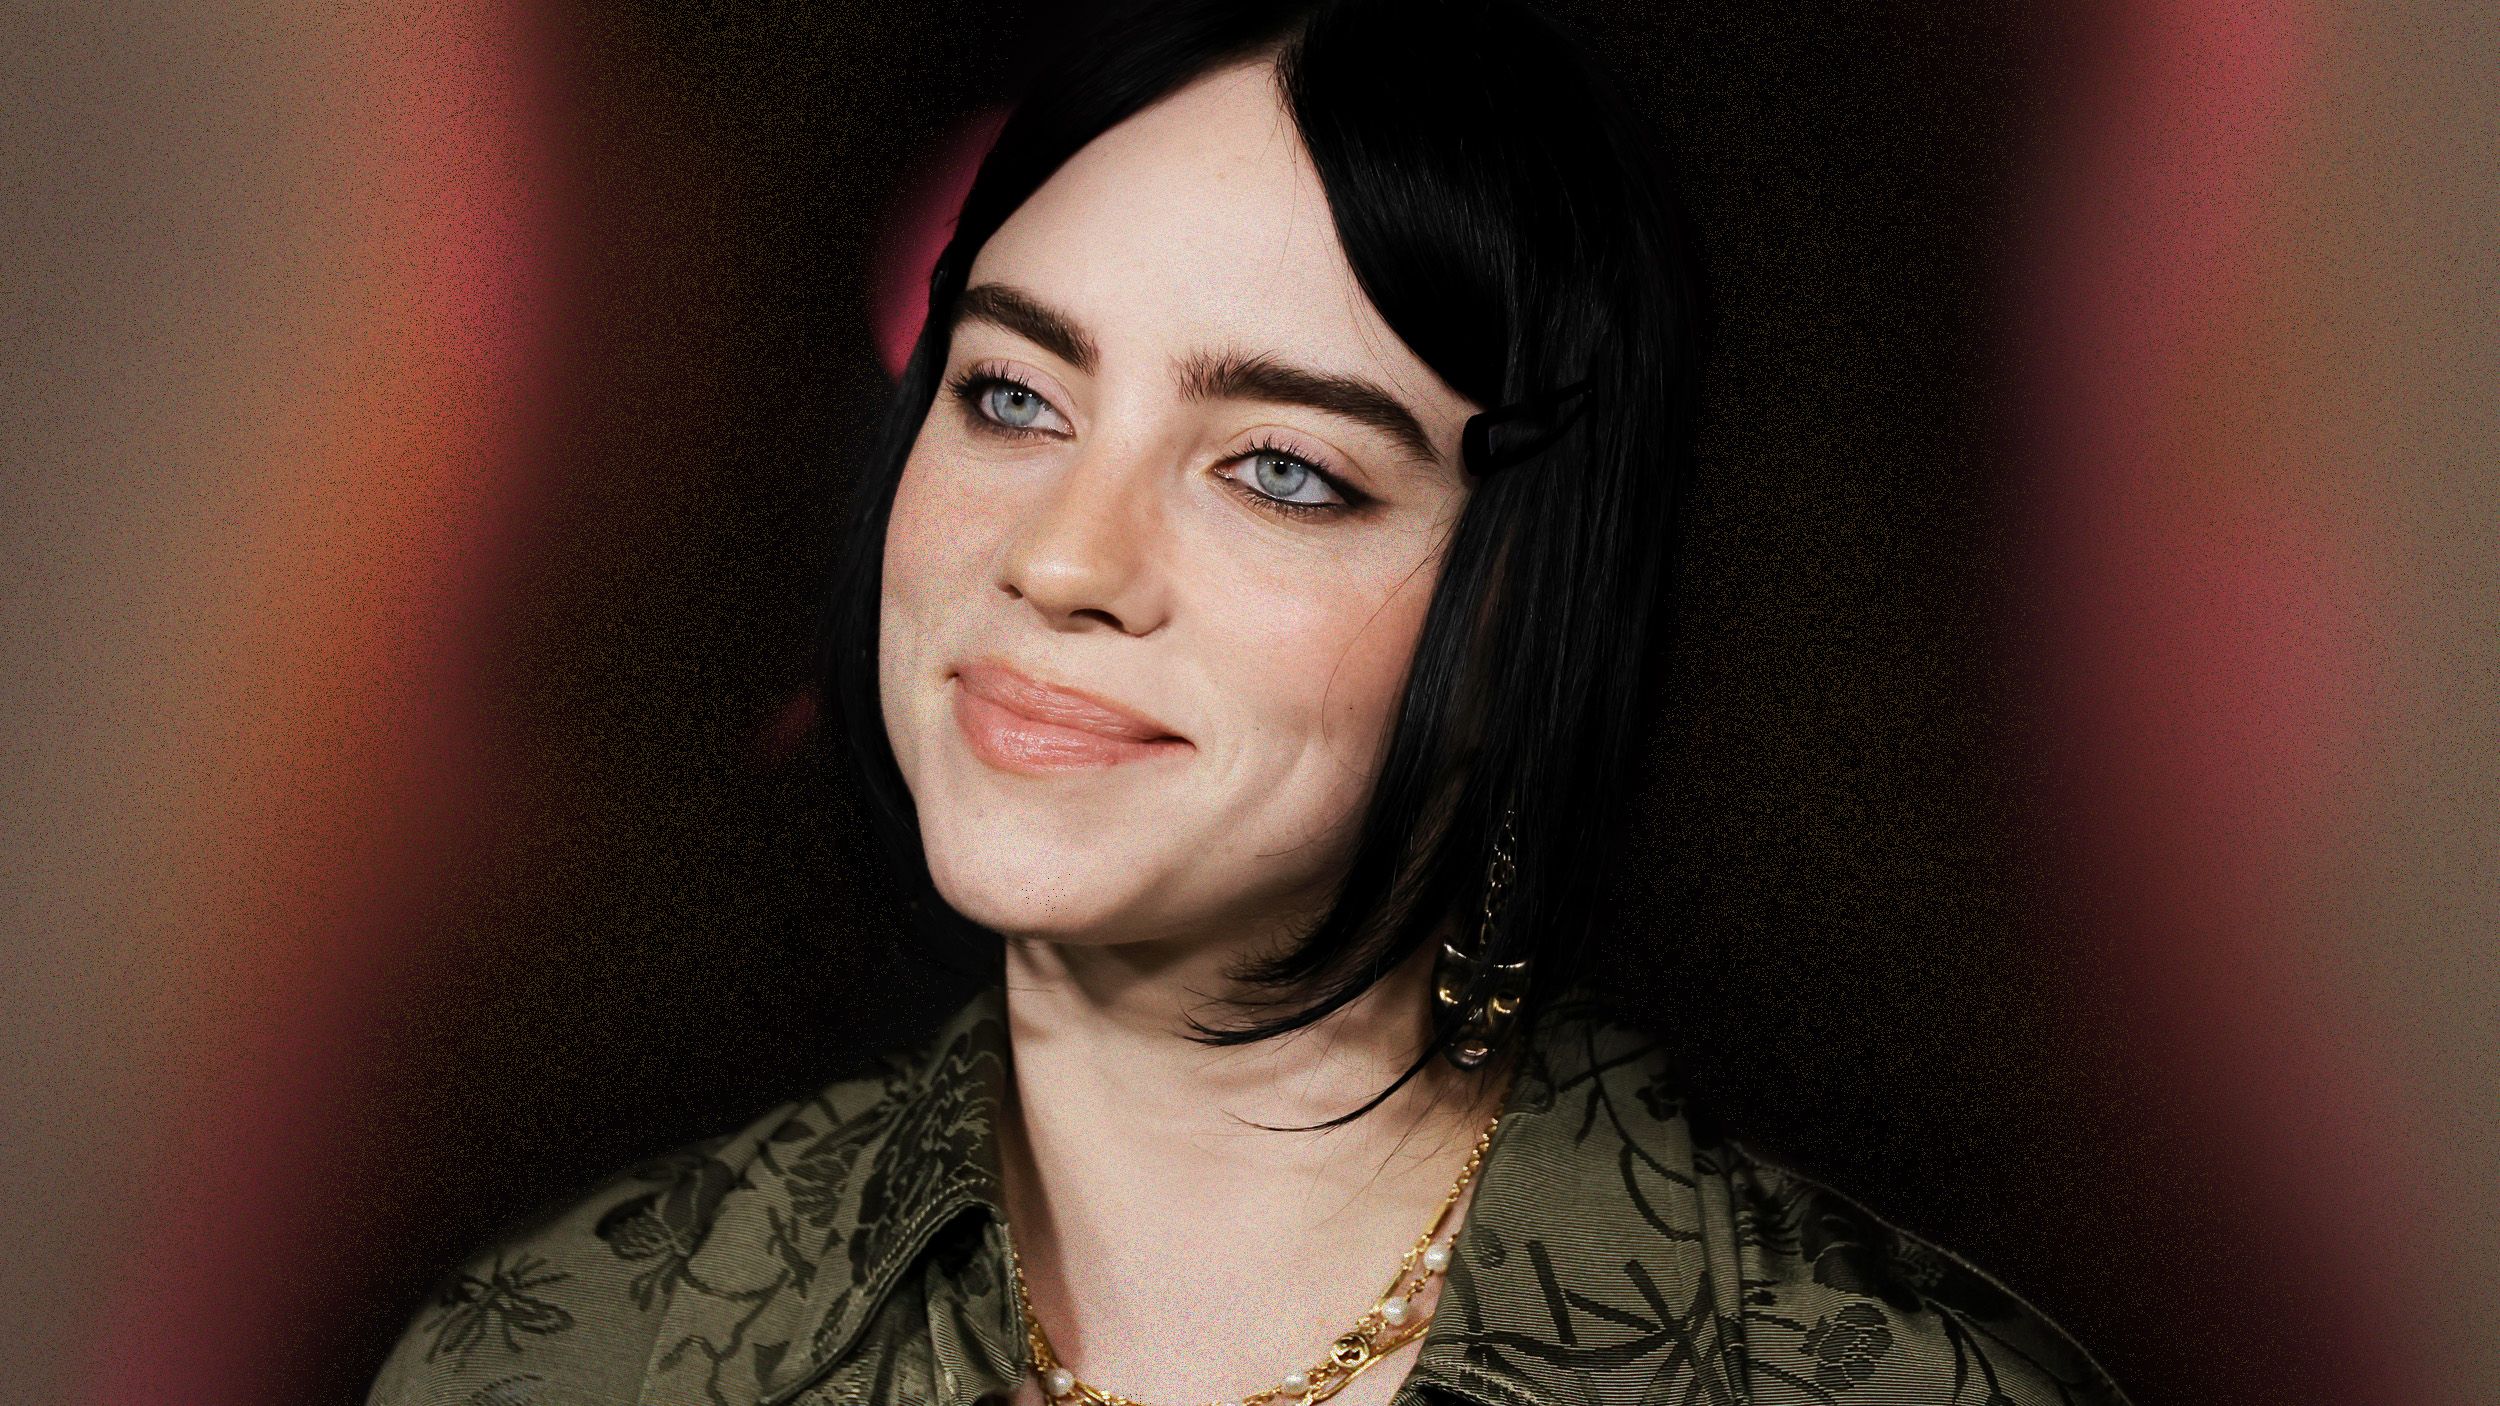 Billie Eilish and the Pursuit of Happiness